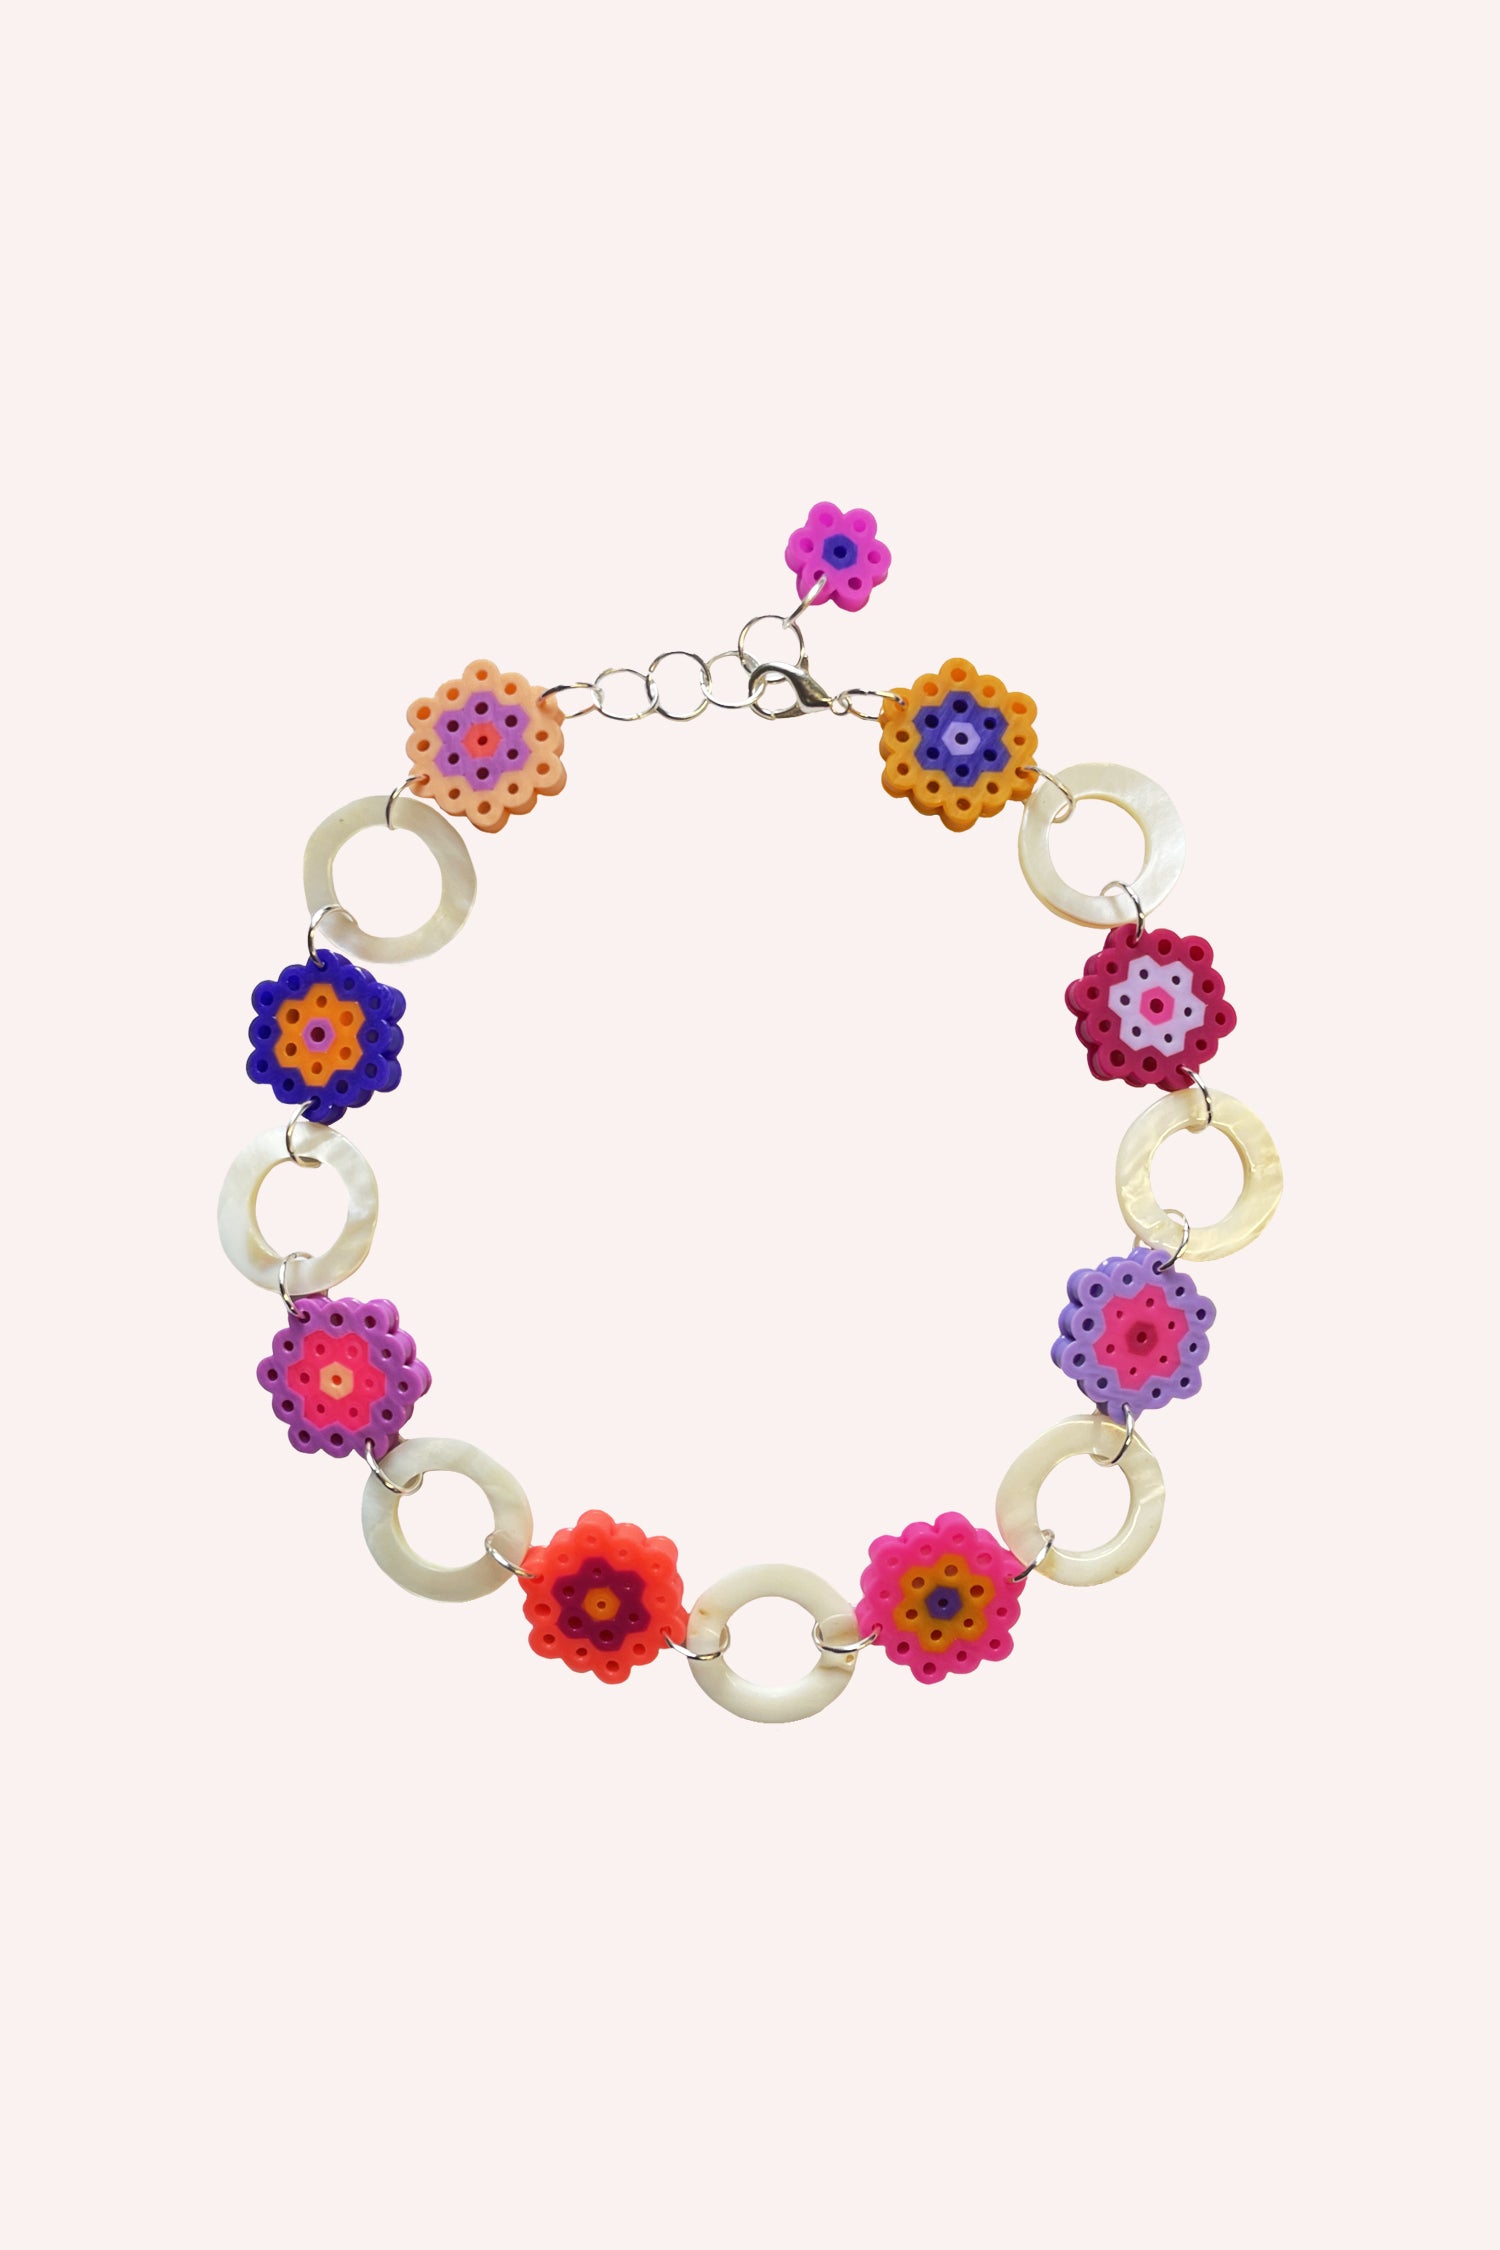 Daisy Chains Mother of Pearl Link Necklace, alternating crowns and hexagonal flower shapes in multiple colors